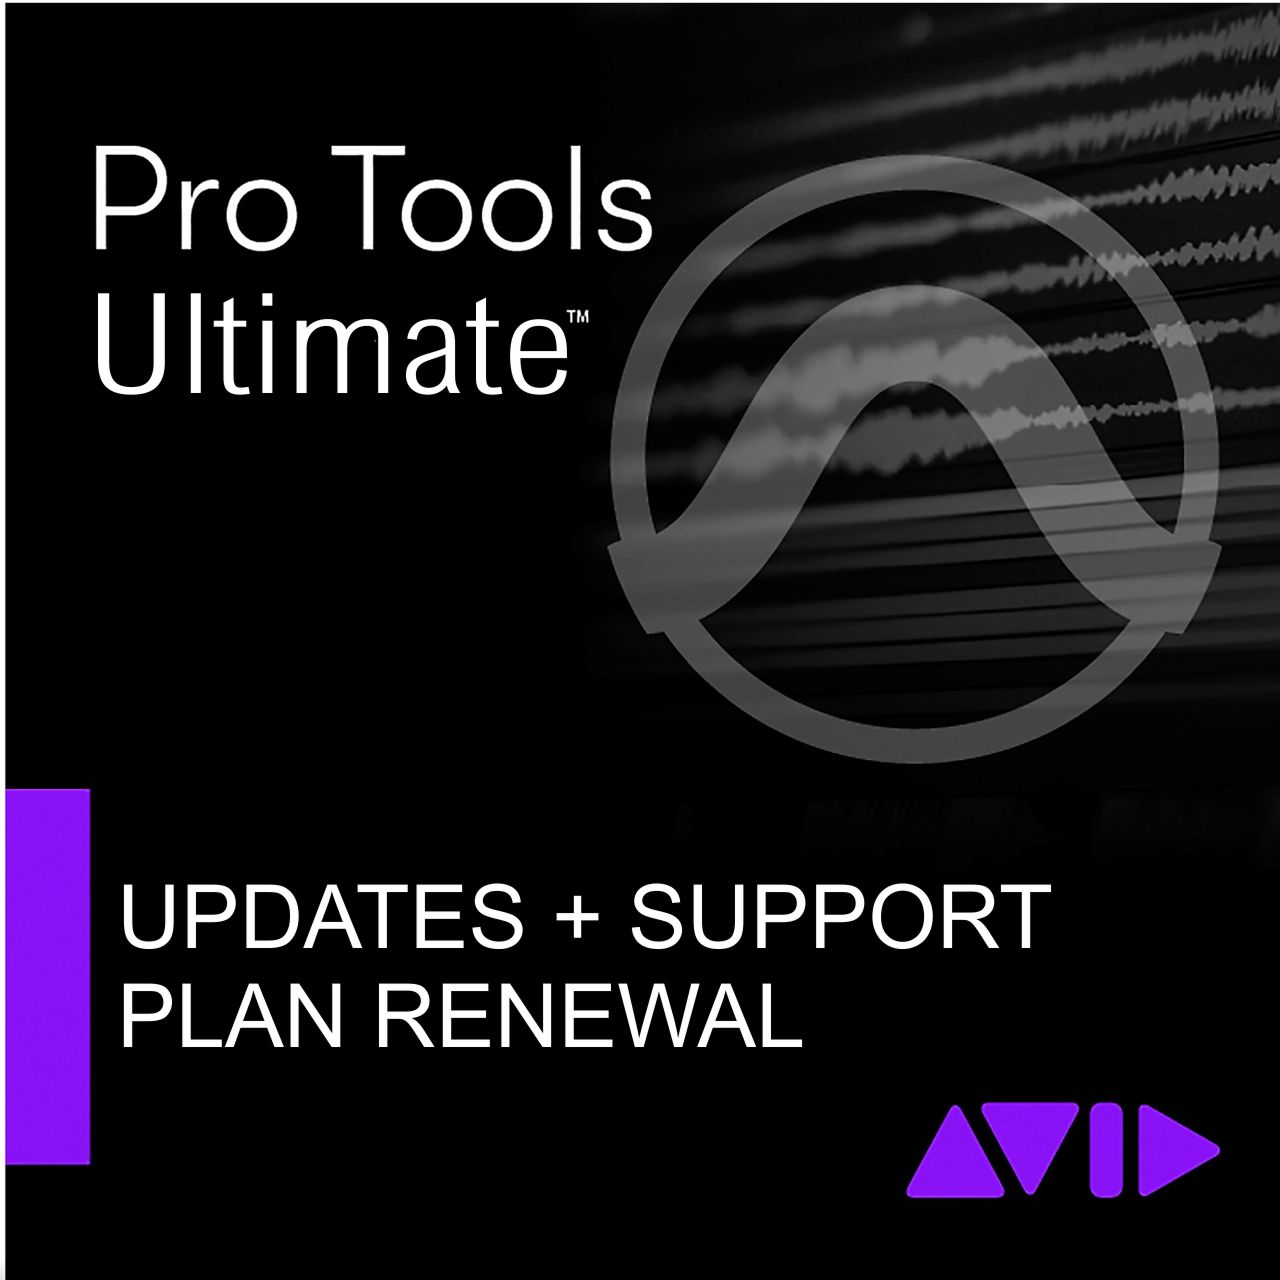 Pro Tools Ultimate Update